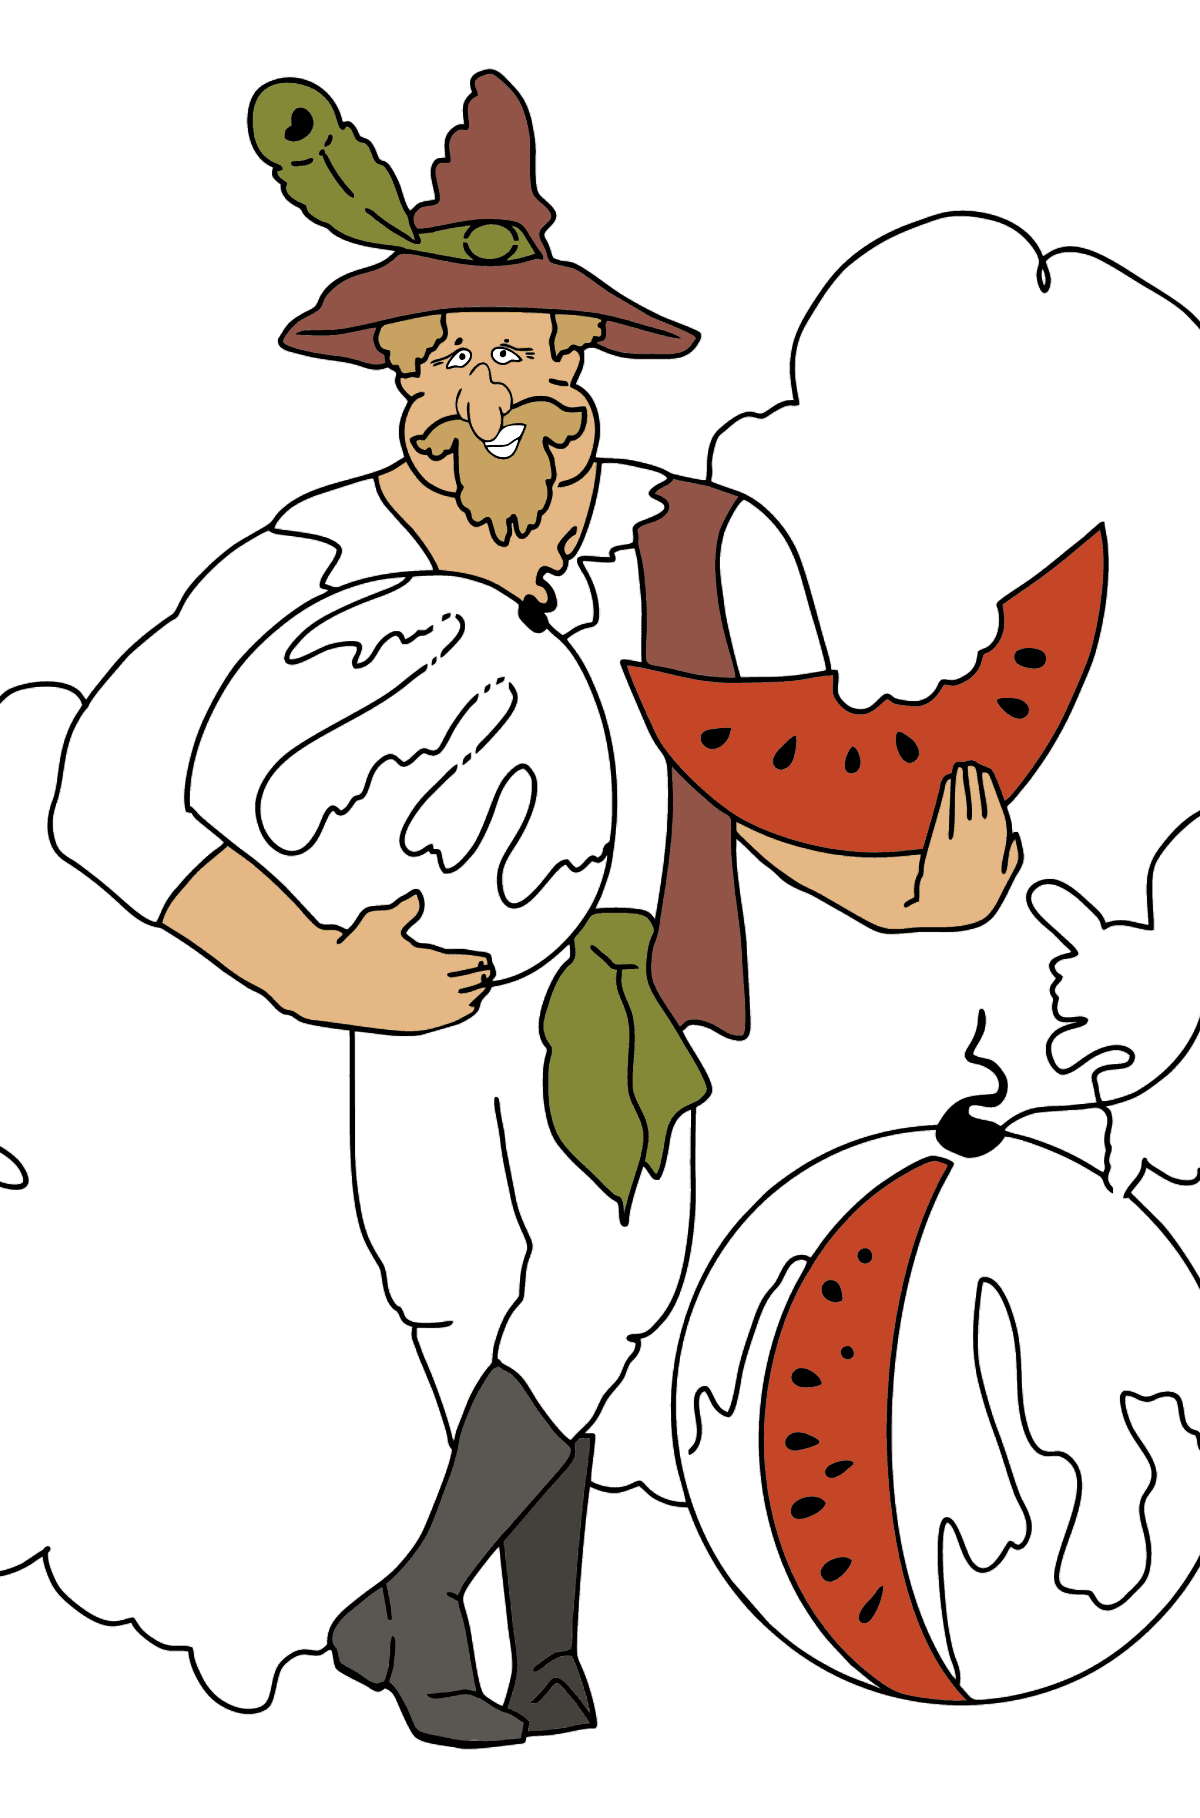 Coloring Page - A Pirate is Eating a Tasty Watermelon - Coloring Pages for Kids